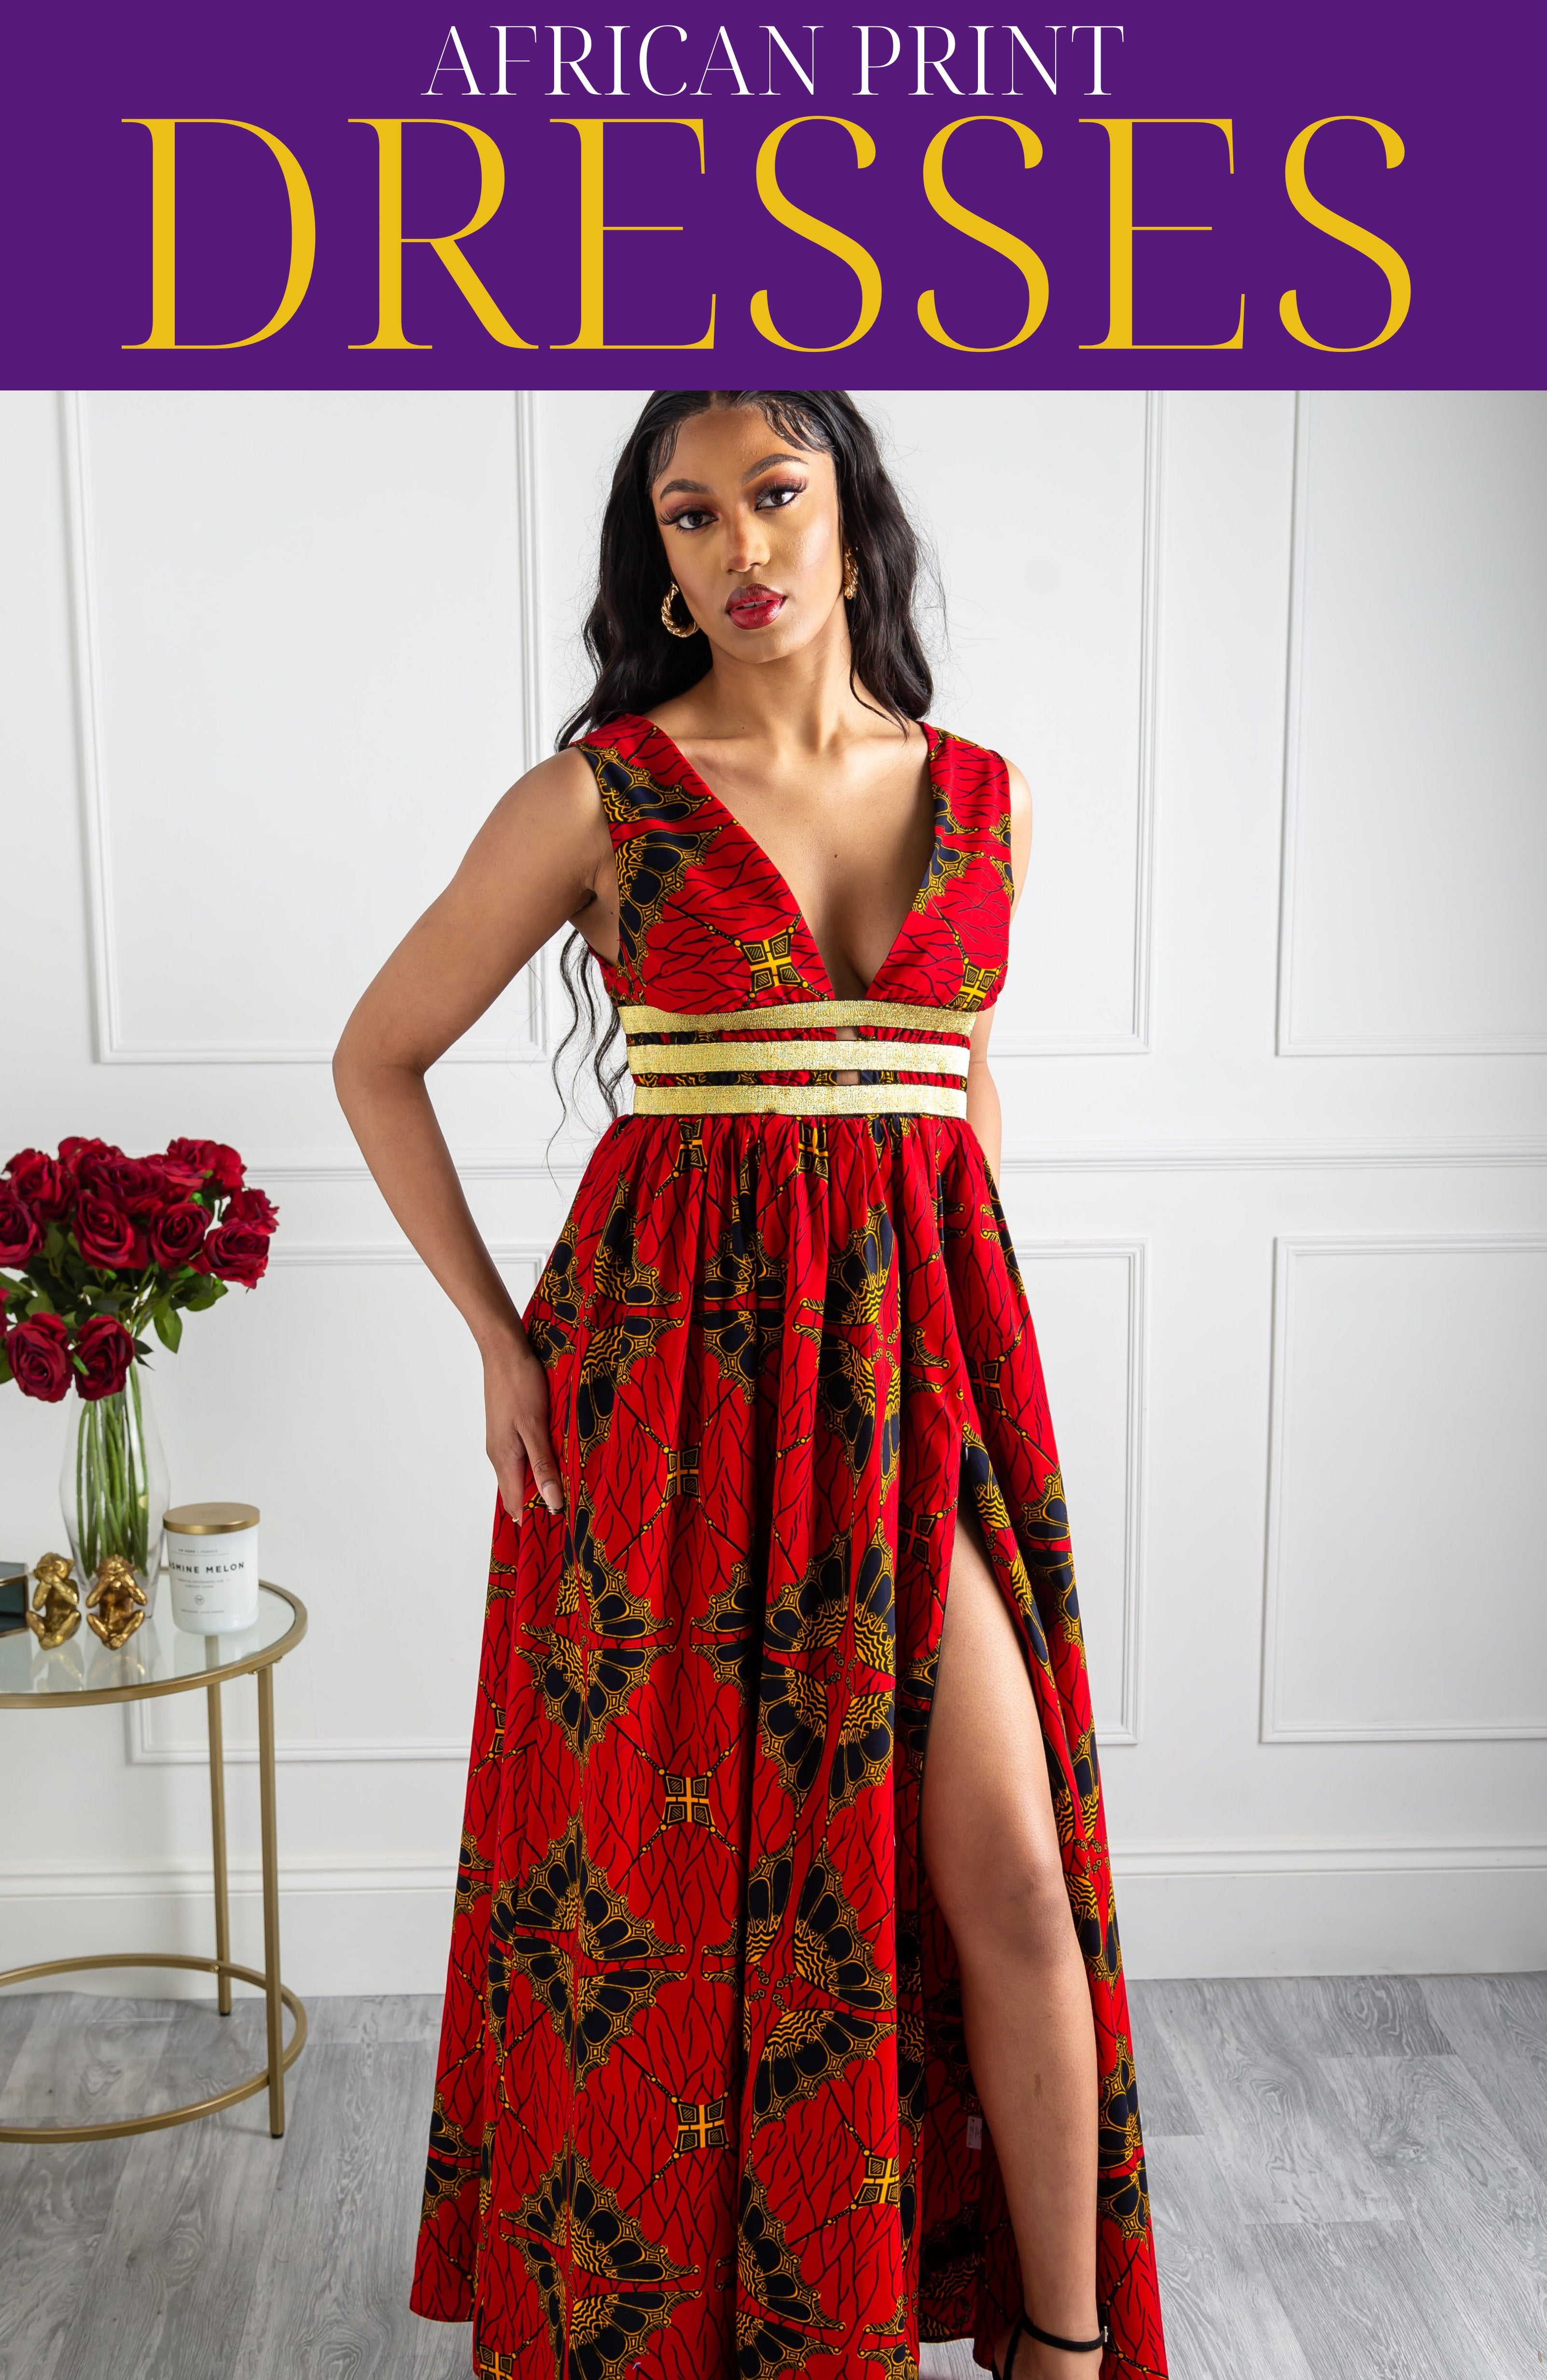 PHOTOS: Classy African Fashion Designs You Need To See - African Dresses  2021